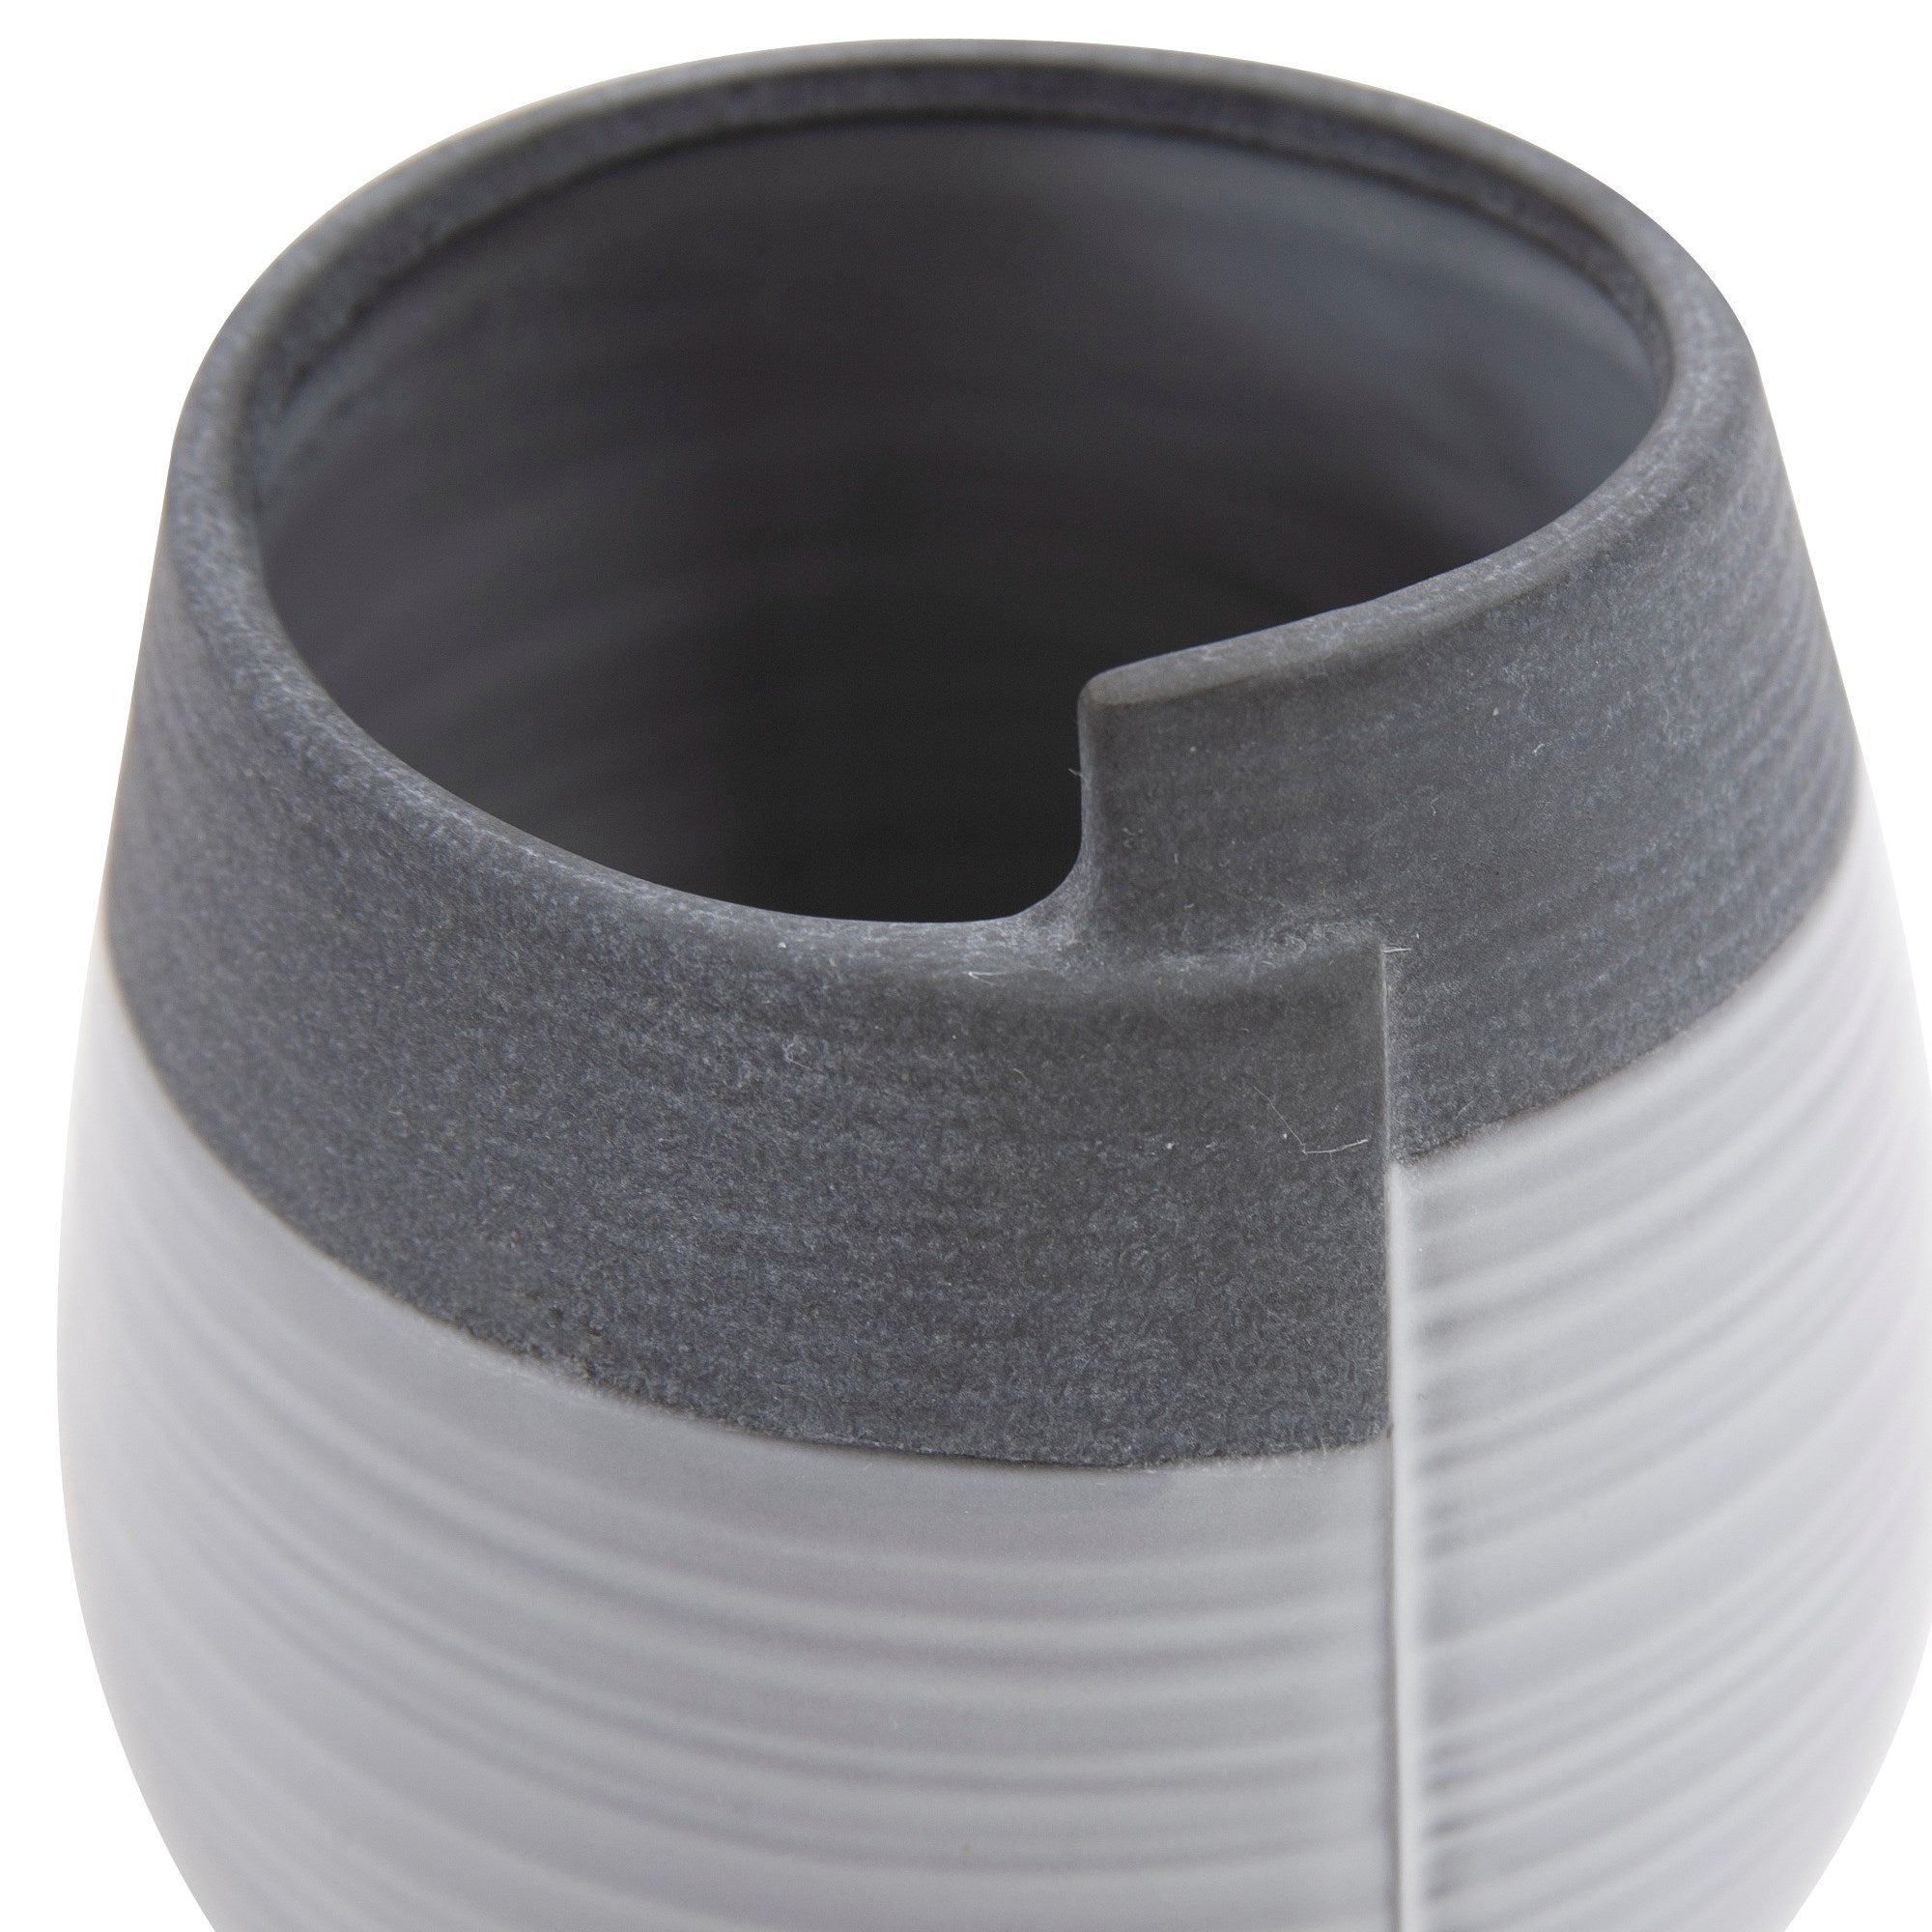 Rolled Two Tone Gray Vase, Small